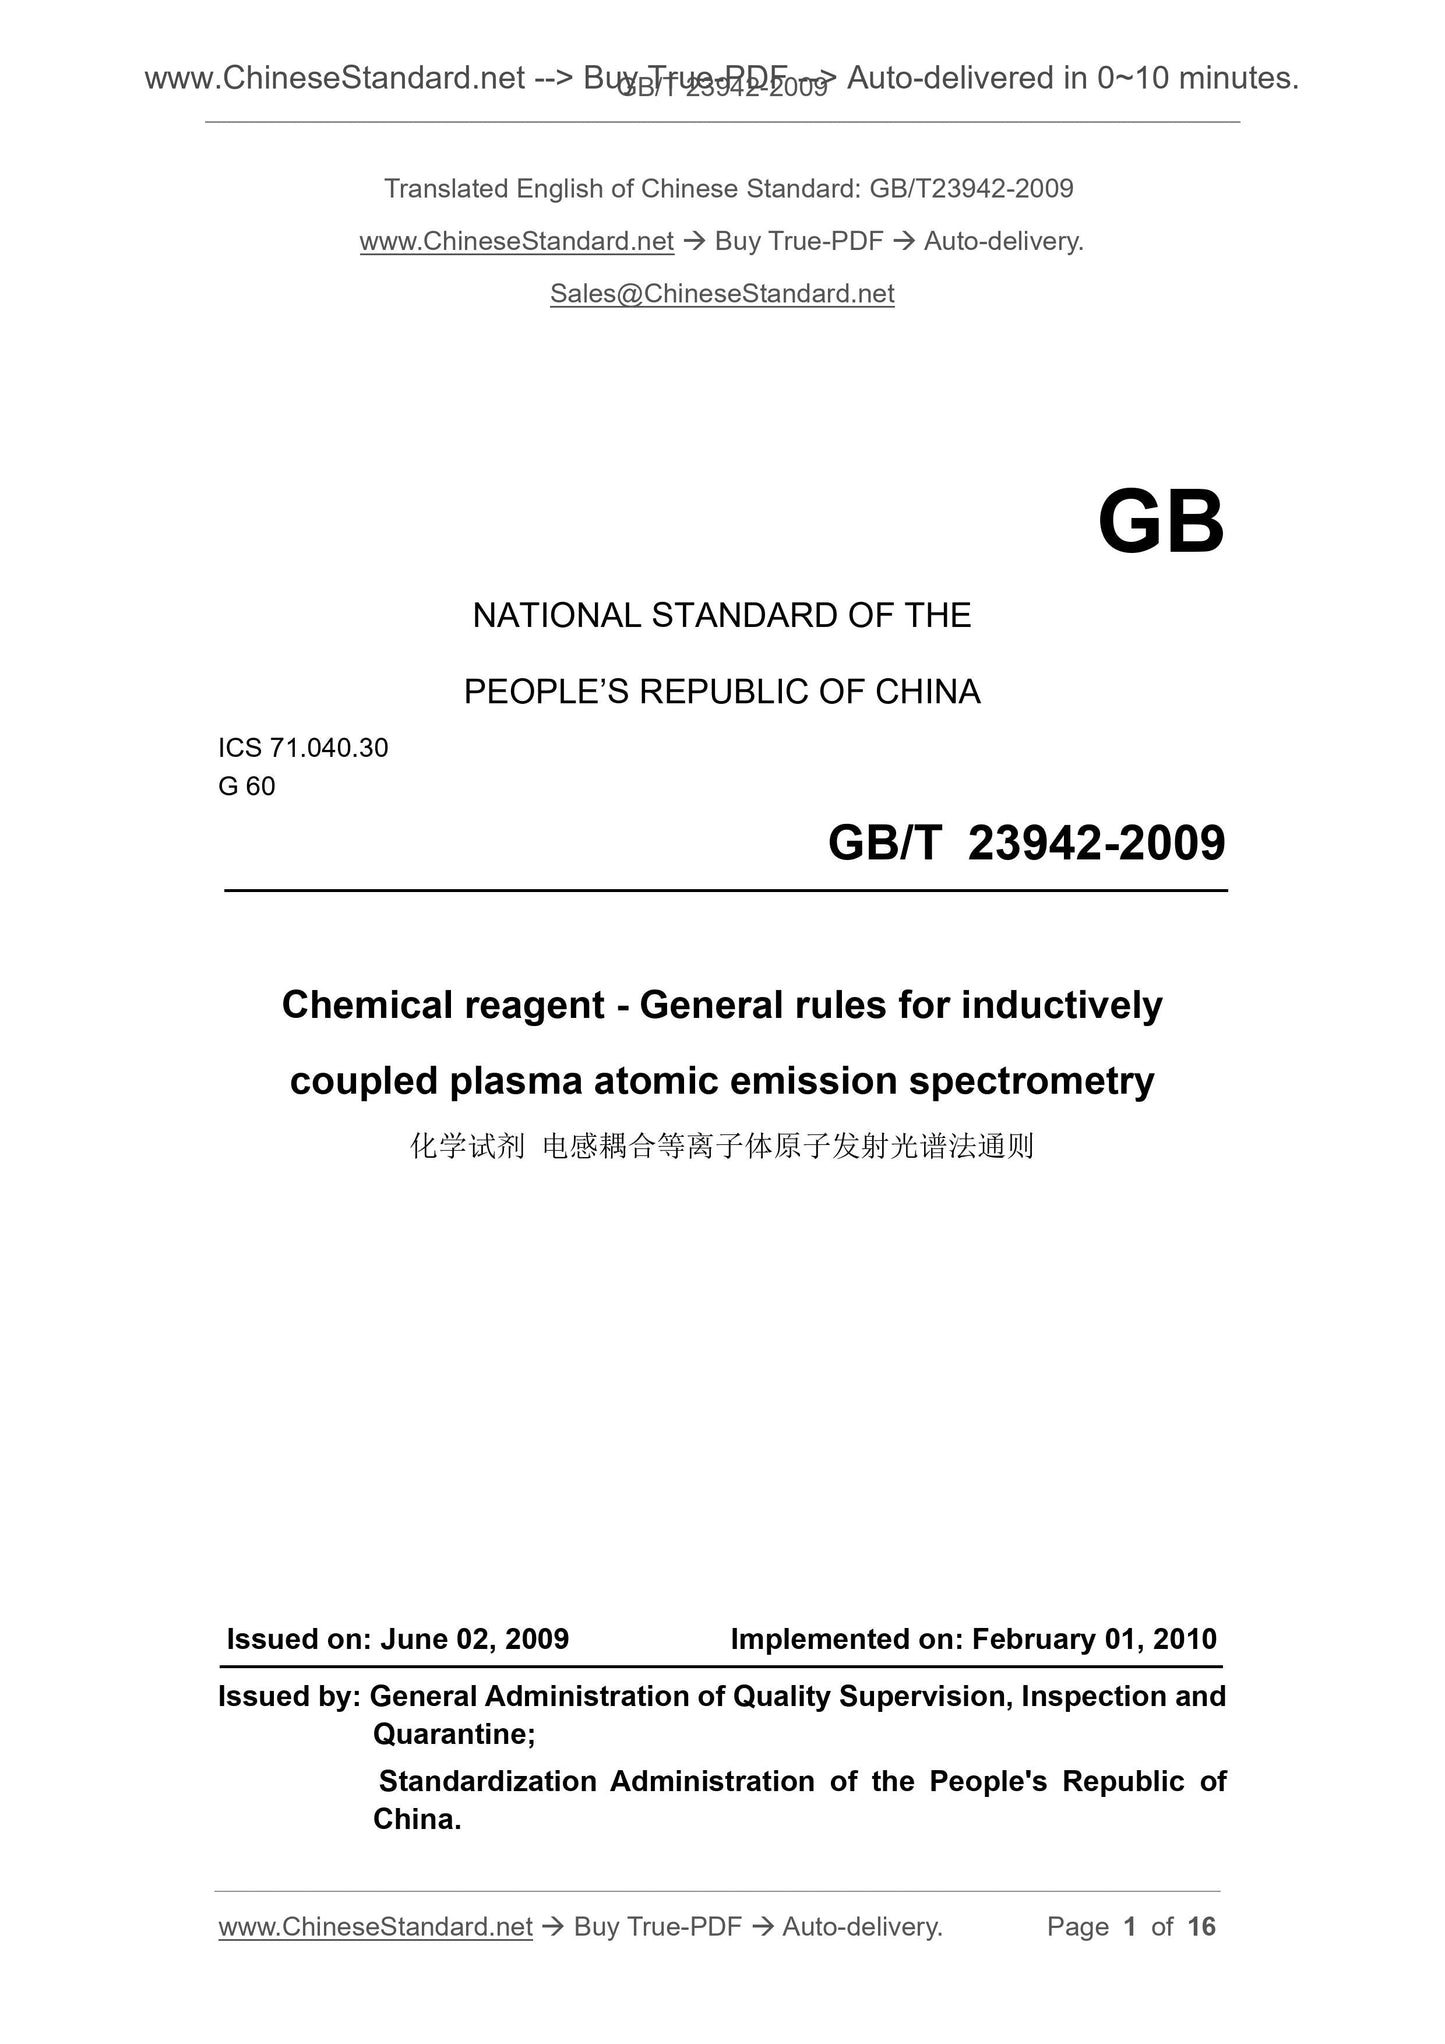 GB/T 23942-2009 Page 1